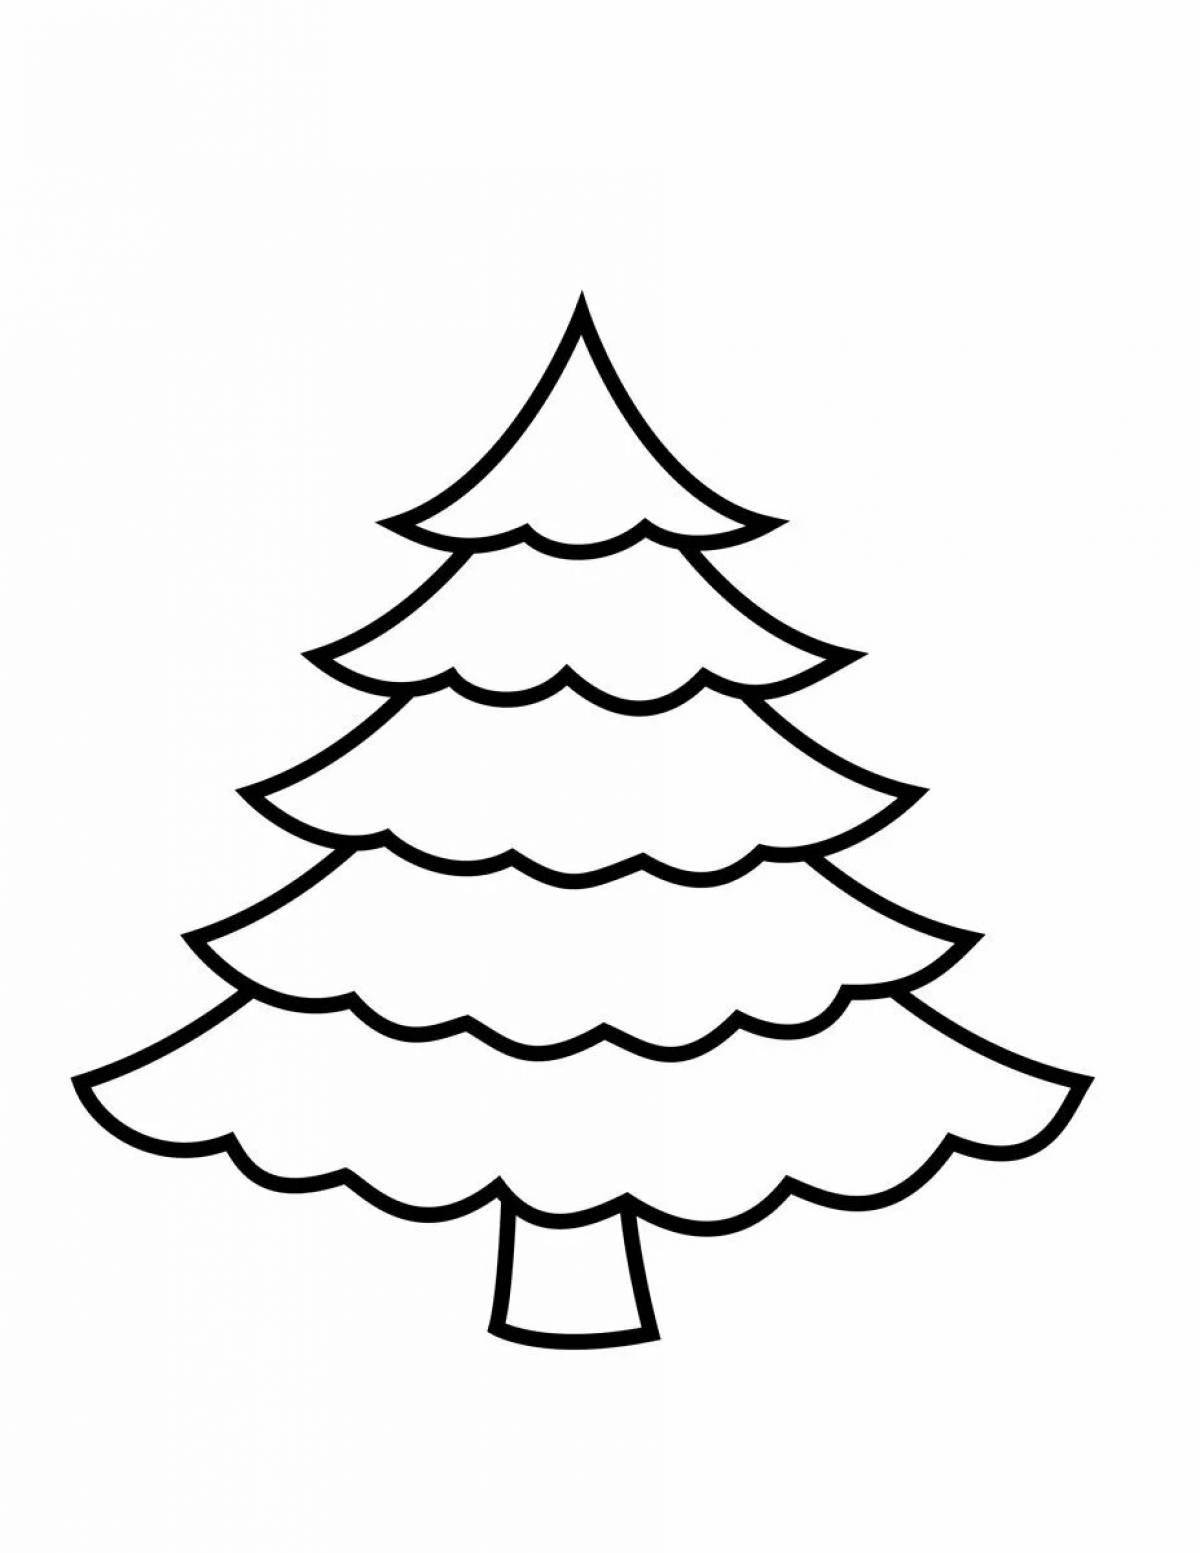 Exquisite Christmas tree design for kids